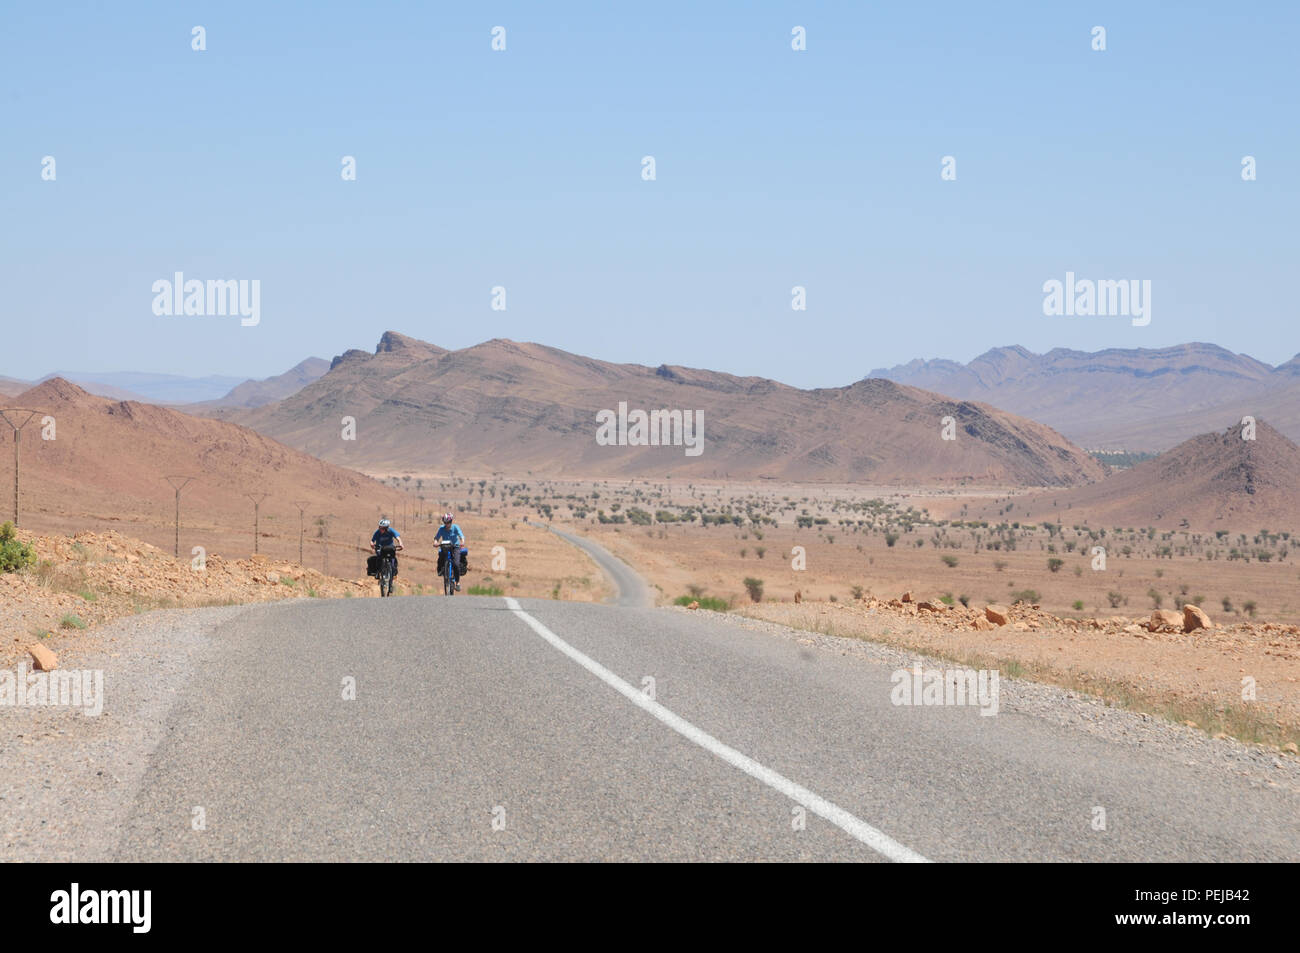 Two cyclists make their way along a road on the edge of the Sahara in Morocco, heading between Tata and Igherm on the edge of the anti Atlas mountains. Stock Photo